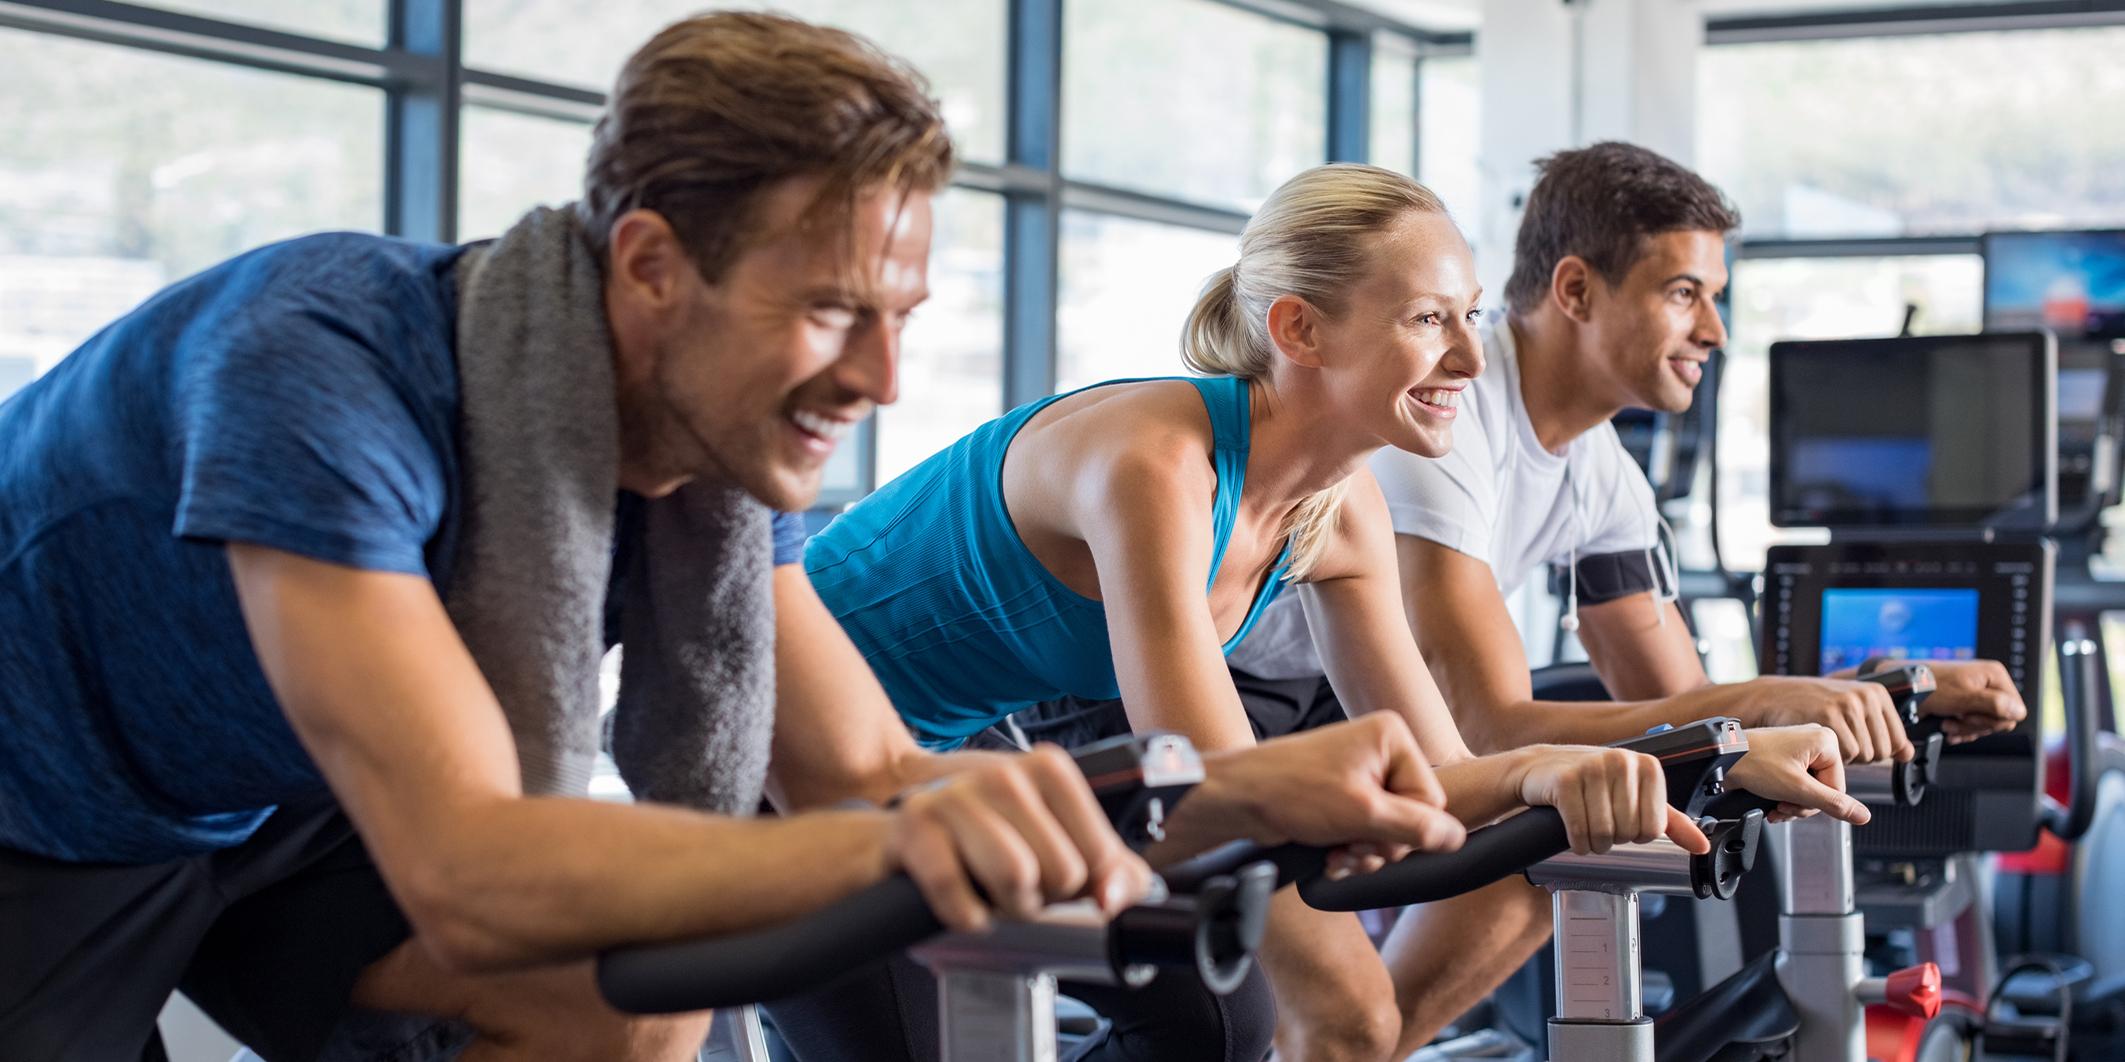 The Important Reason You Should Go To The Gym Immediately After Waking